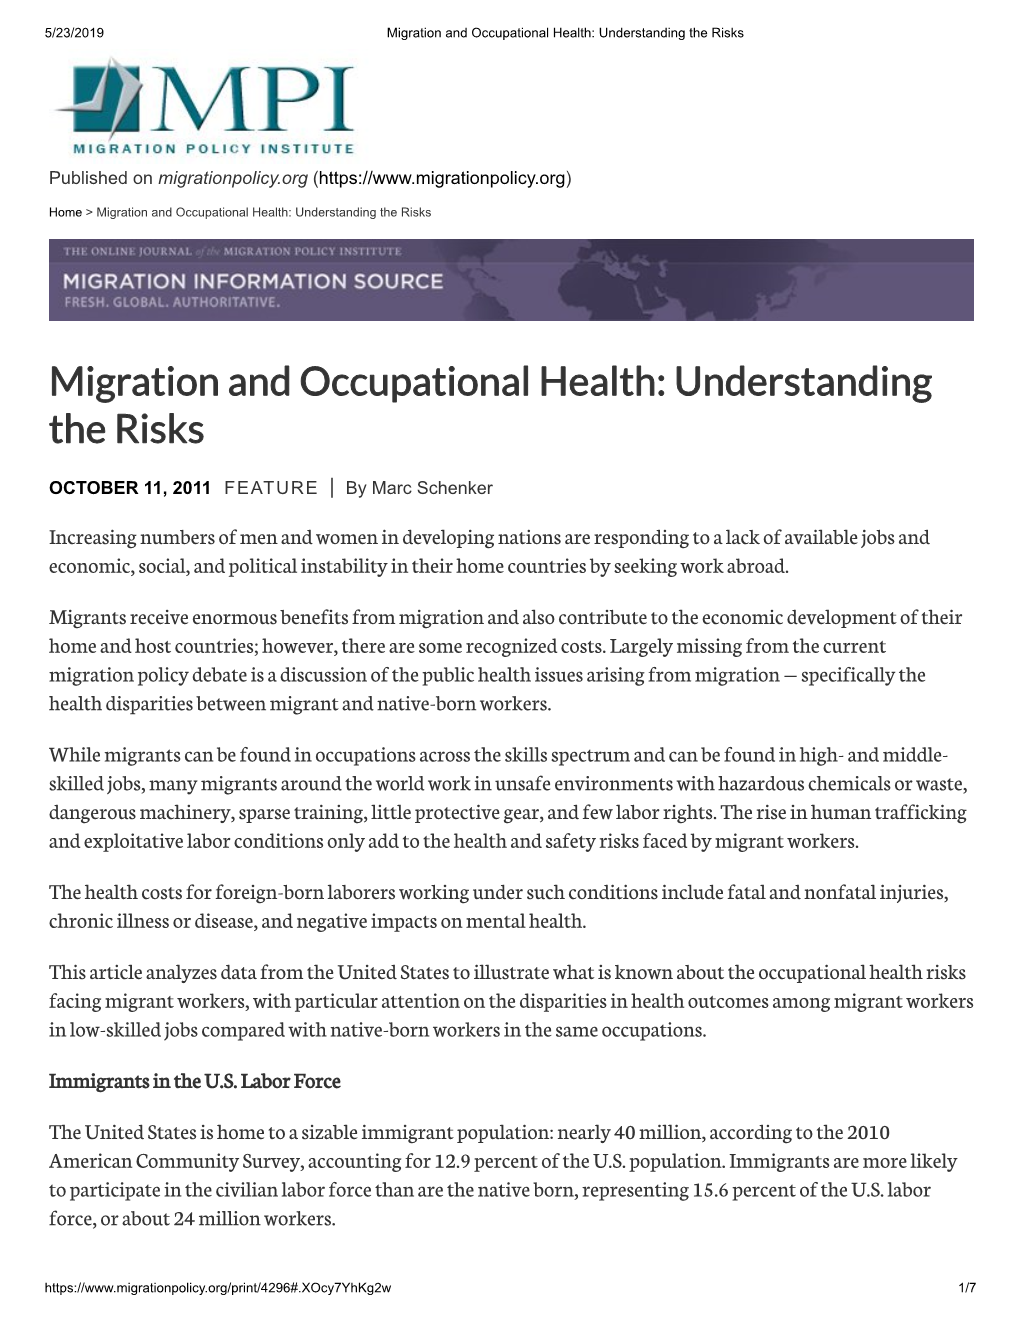 Migration and Occupational Health: Understanding the Risks